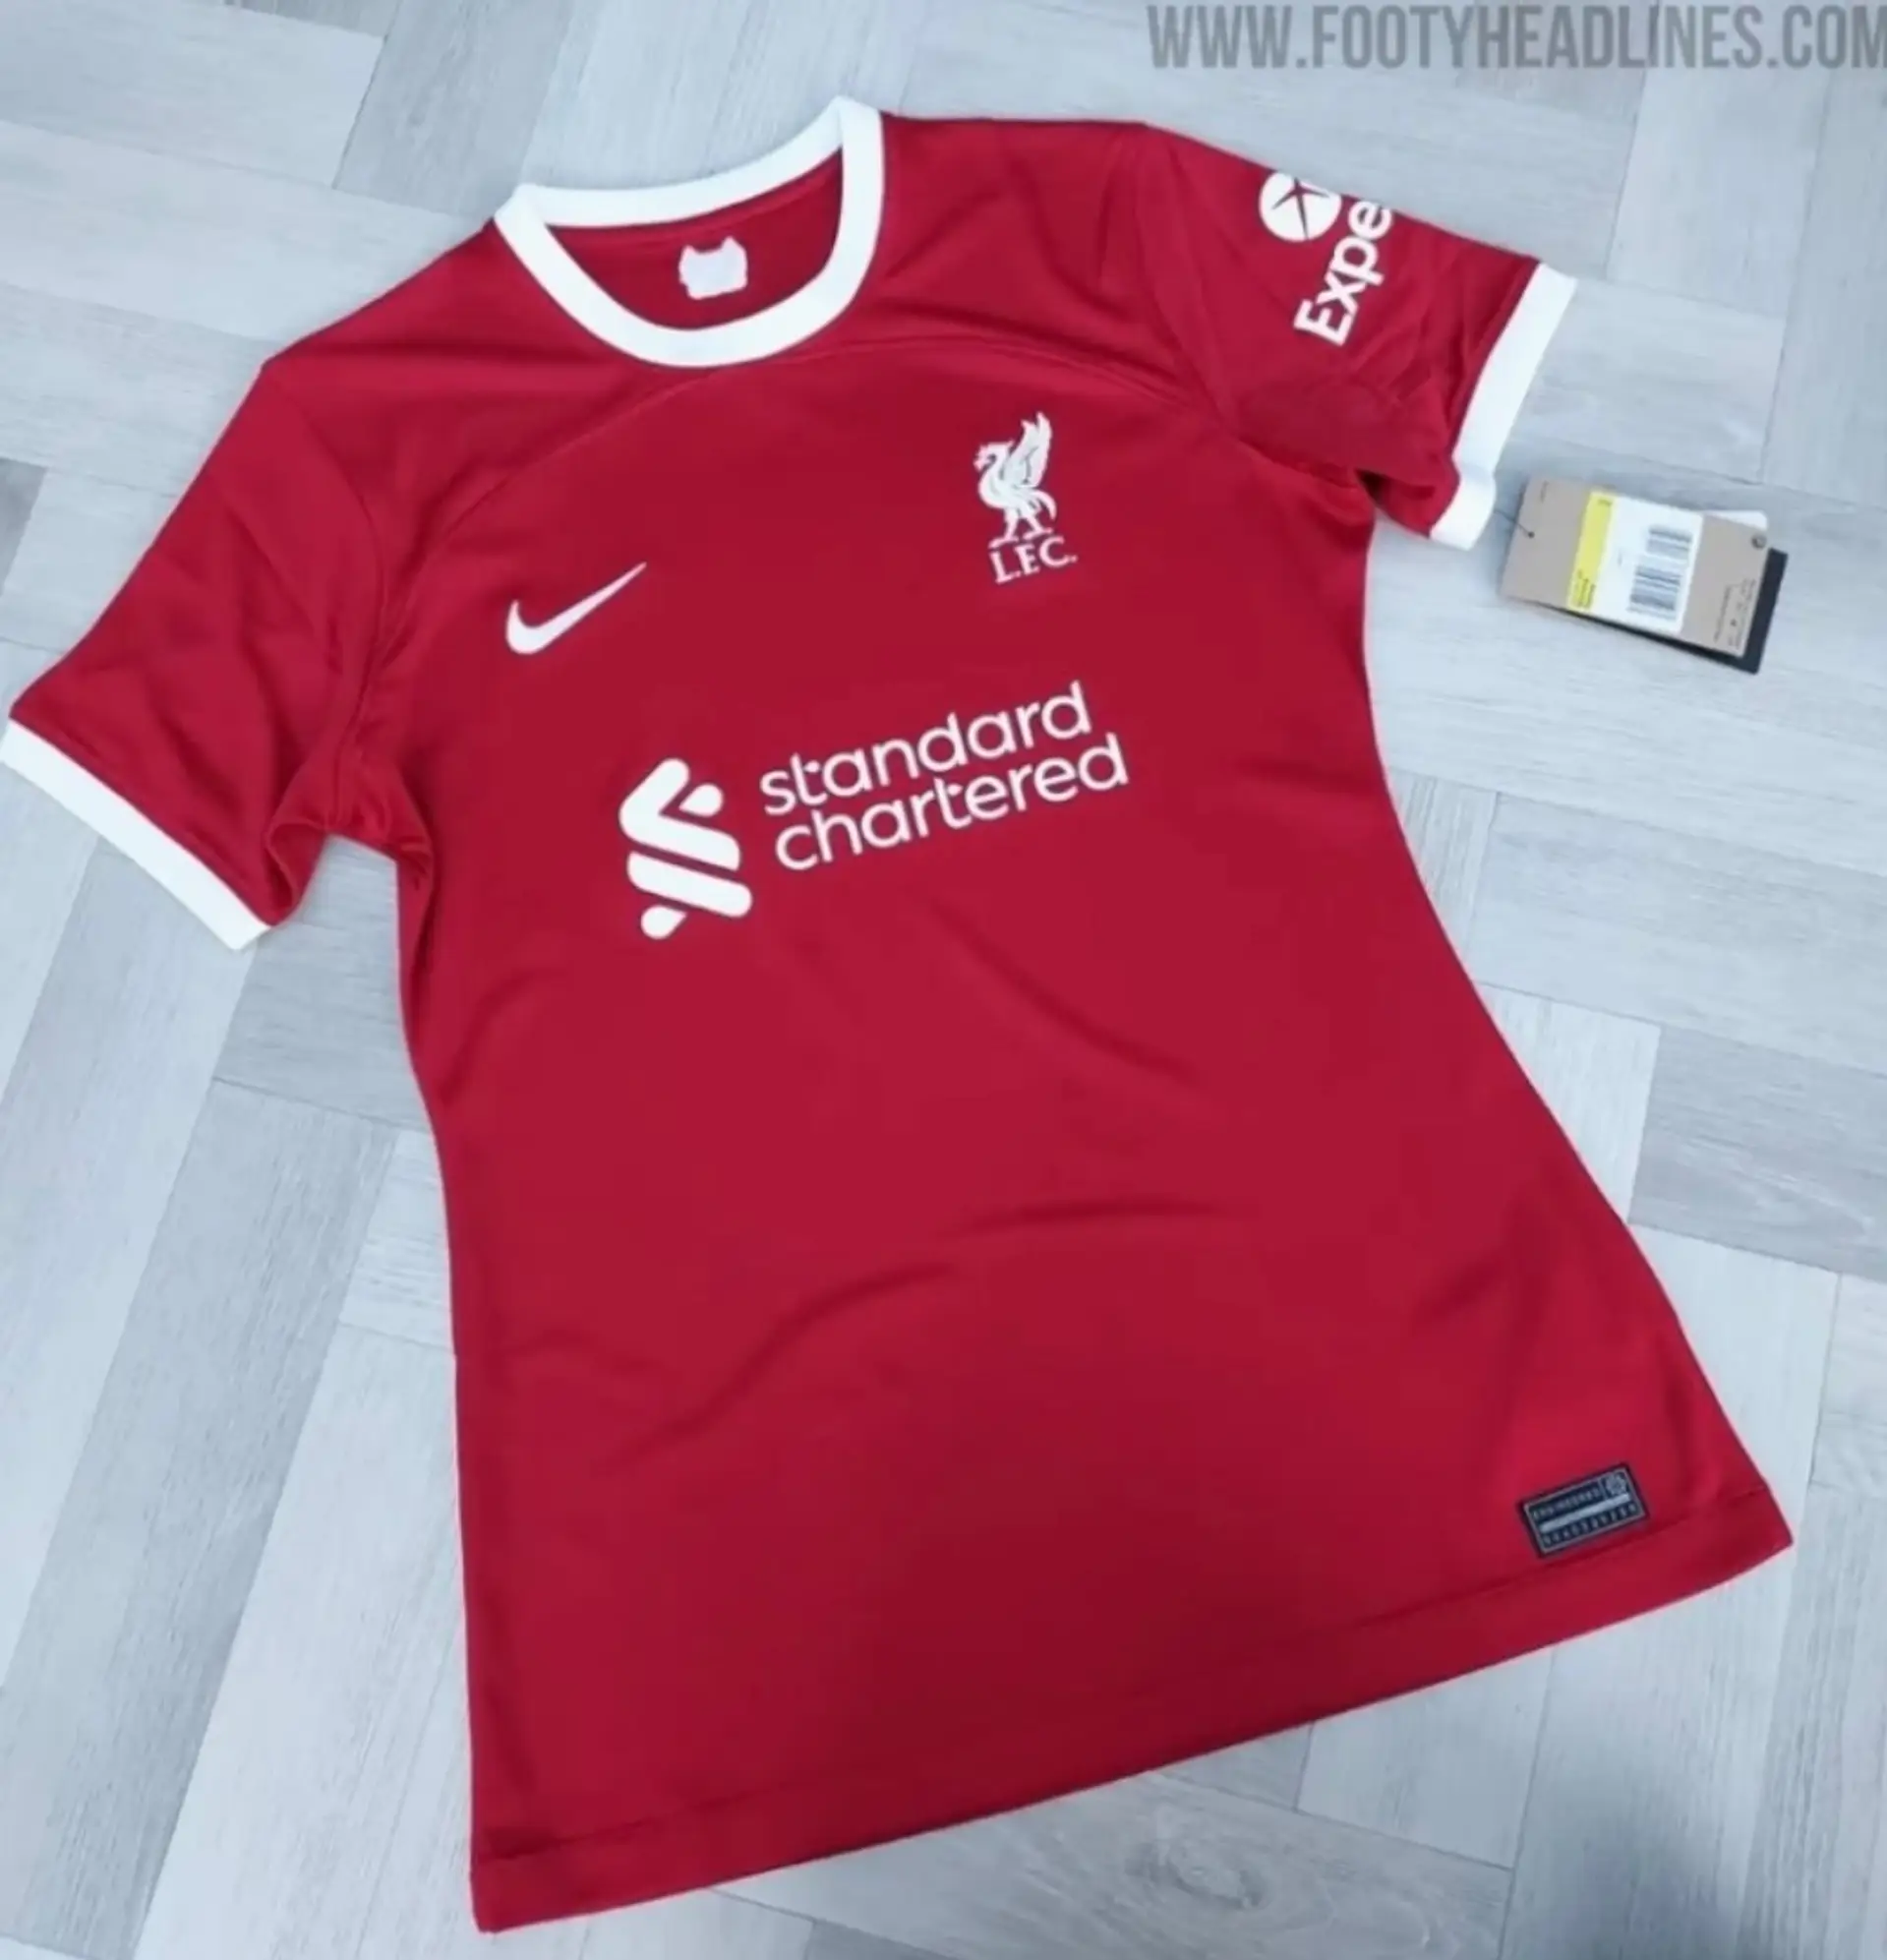 Retoucheren Herformuleren Verminderen First images of Liverpool's 2023-24 home kit 'leaked' - it could be tribute  to Bill Shankly's side - Football | Tribuna.com